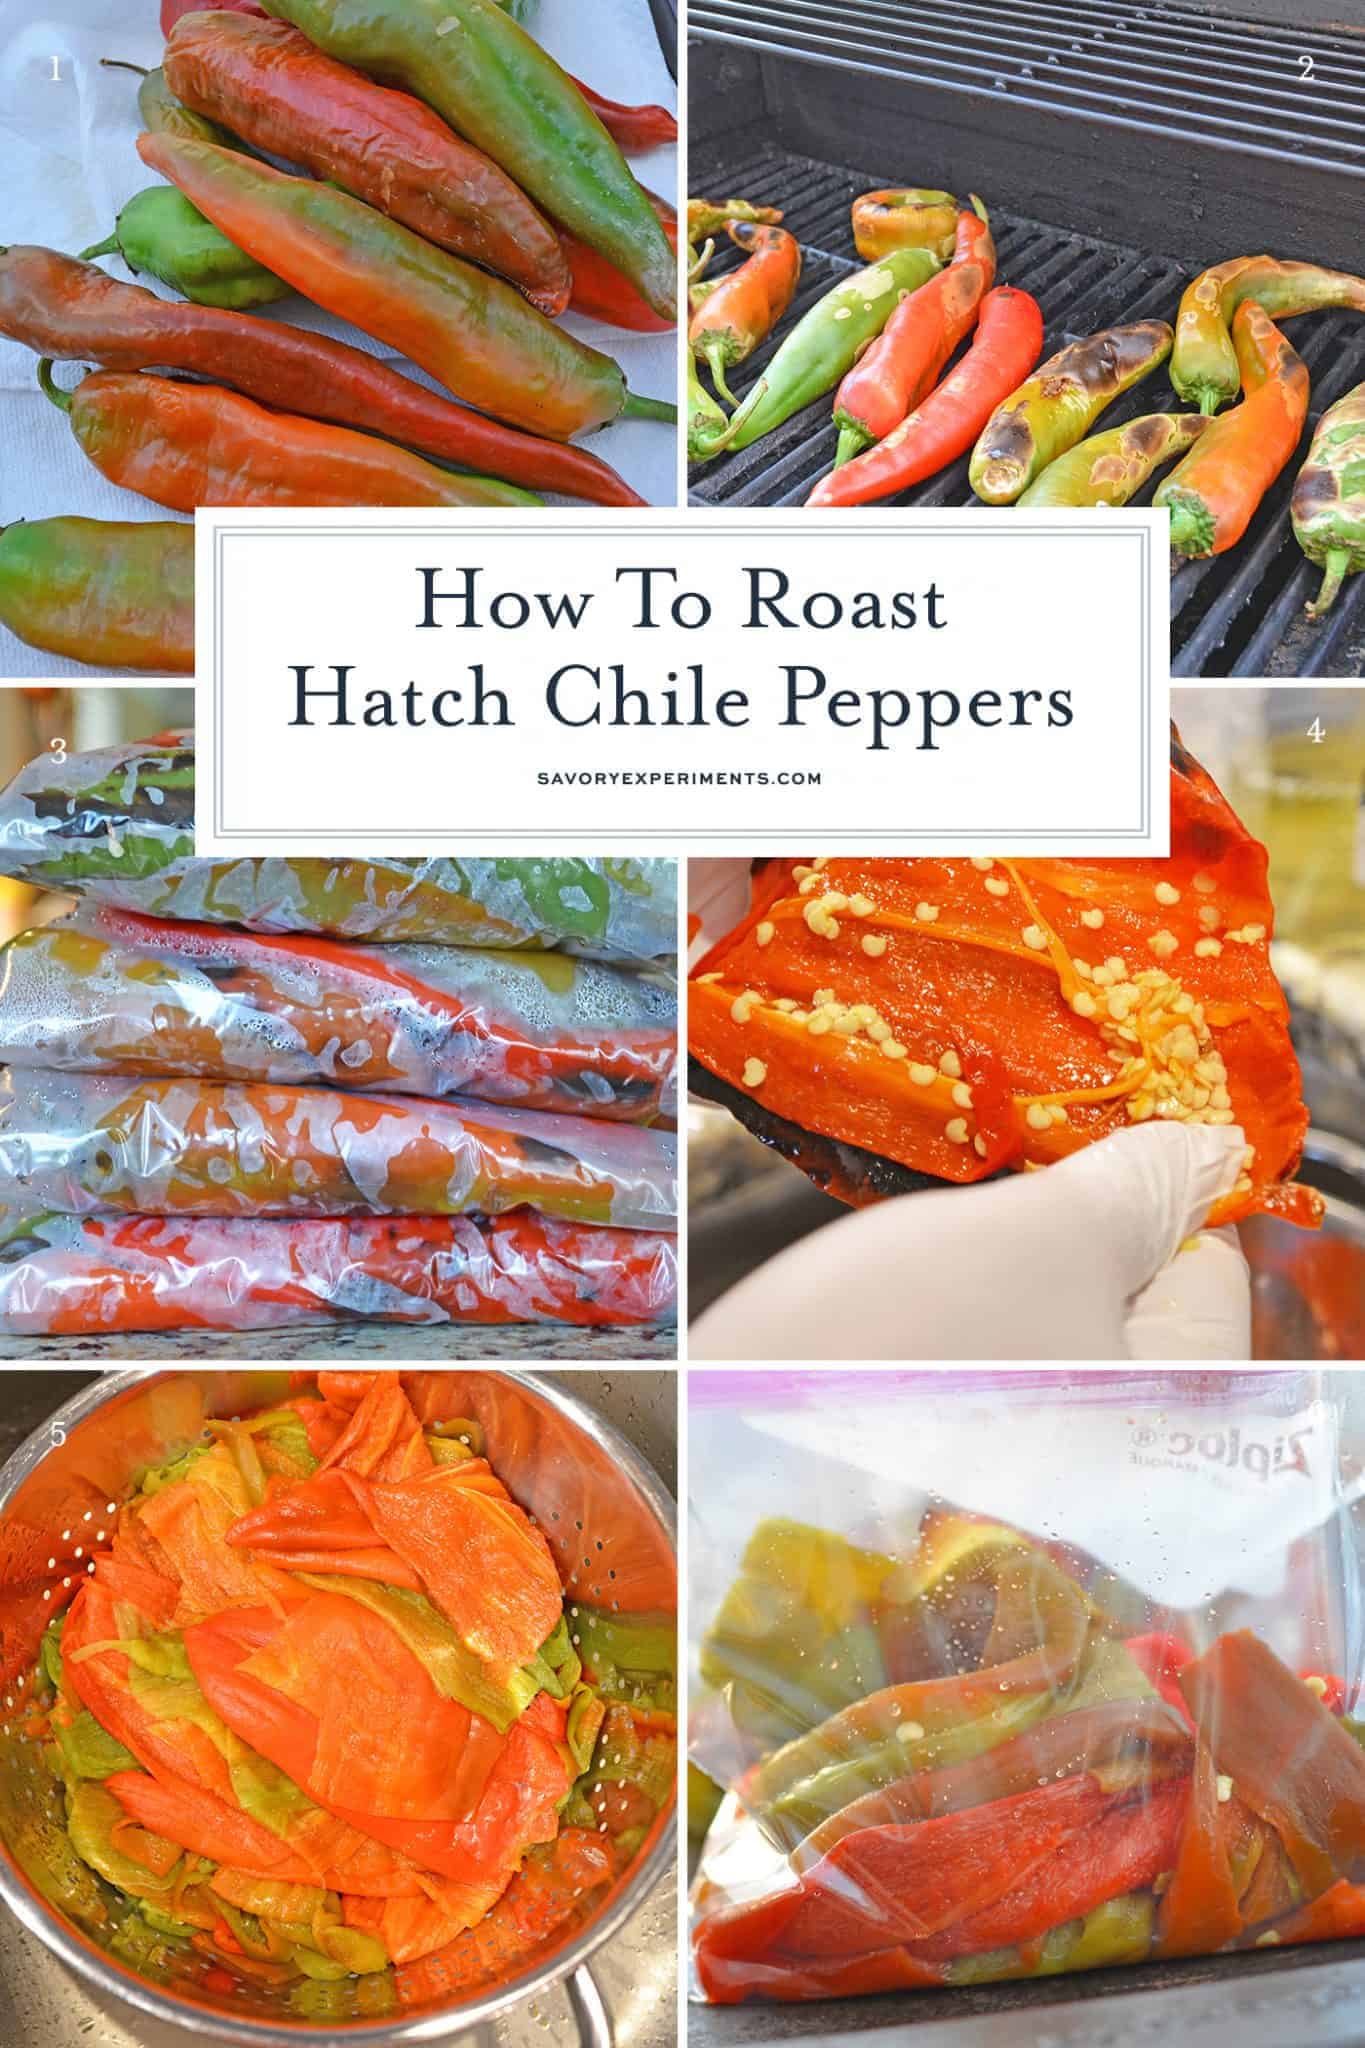 Step-by-step instructions with pictures on how to roast Hatch chile peppers. Roast, peel and seed super easy! #howtoroasthatchchilepeppers #hatchchile www.savoryexperiments.com 